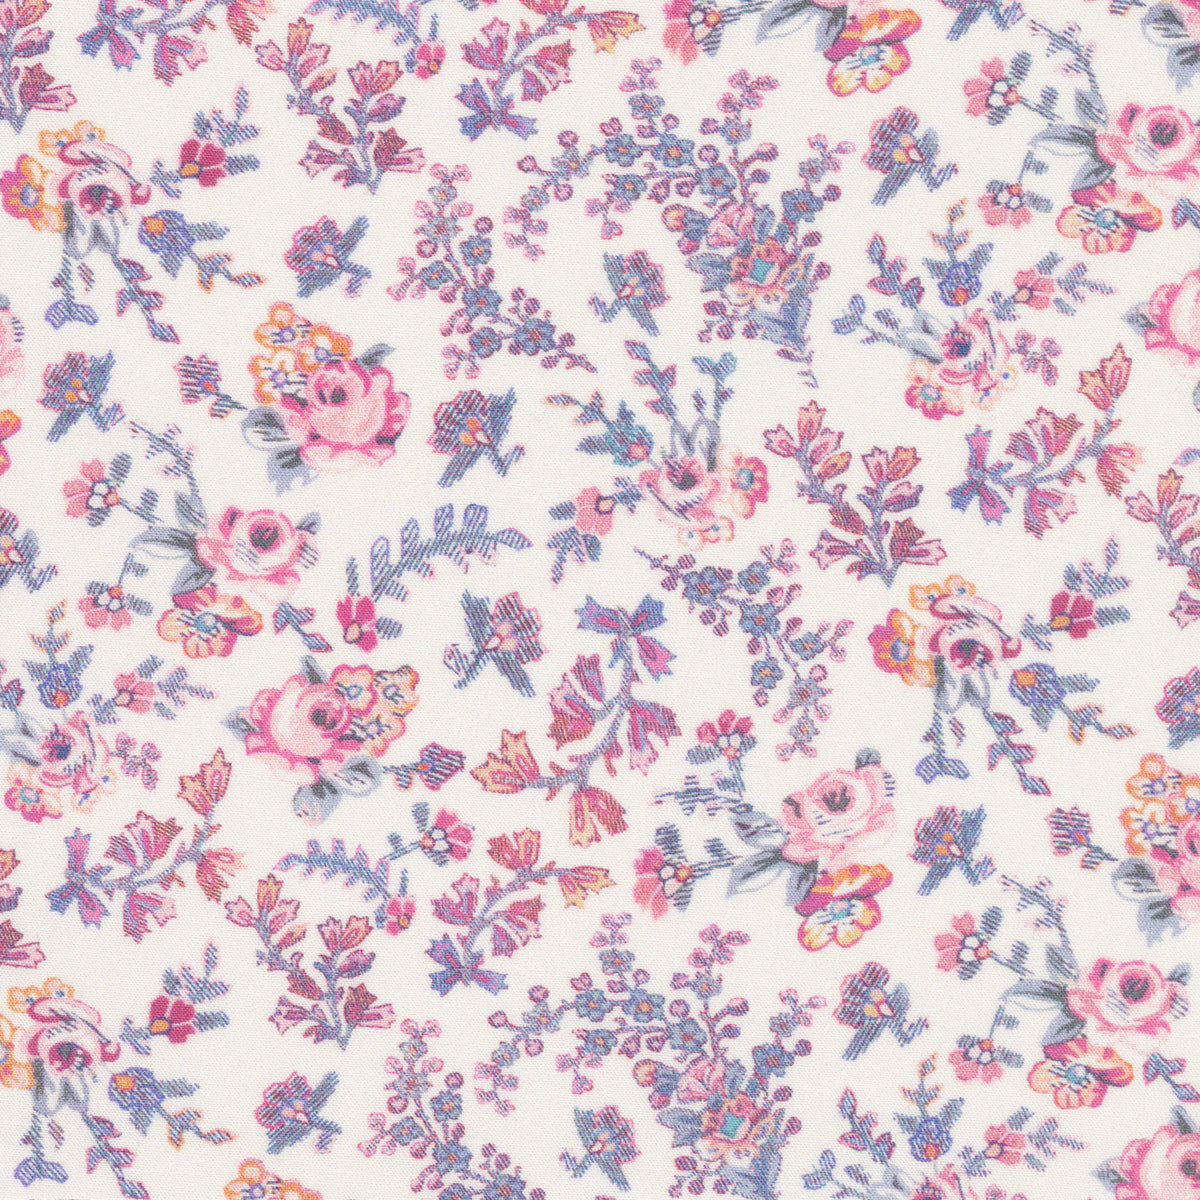 Made-to-Order Fabric in Pale Pink/Blue Sea Rose Liberty Fabric